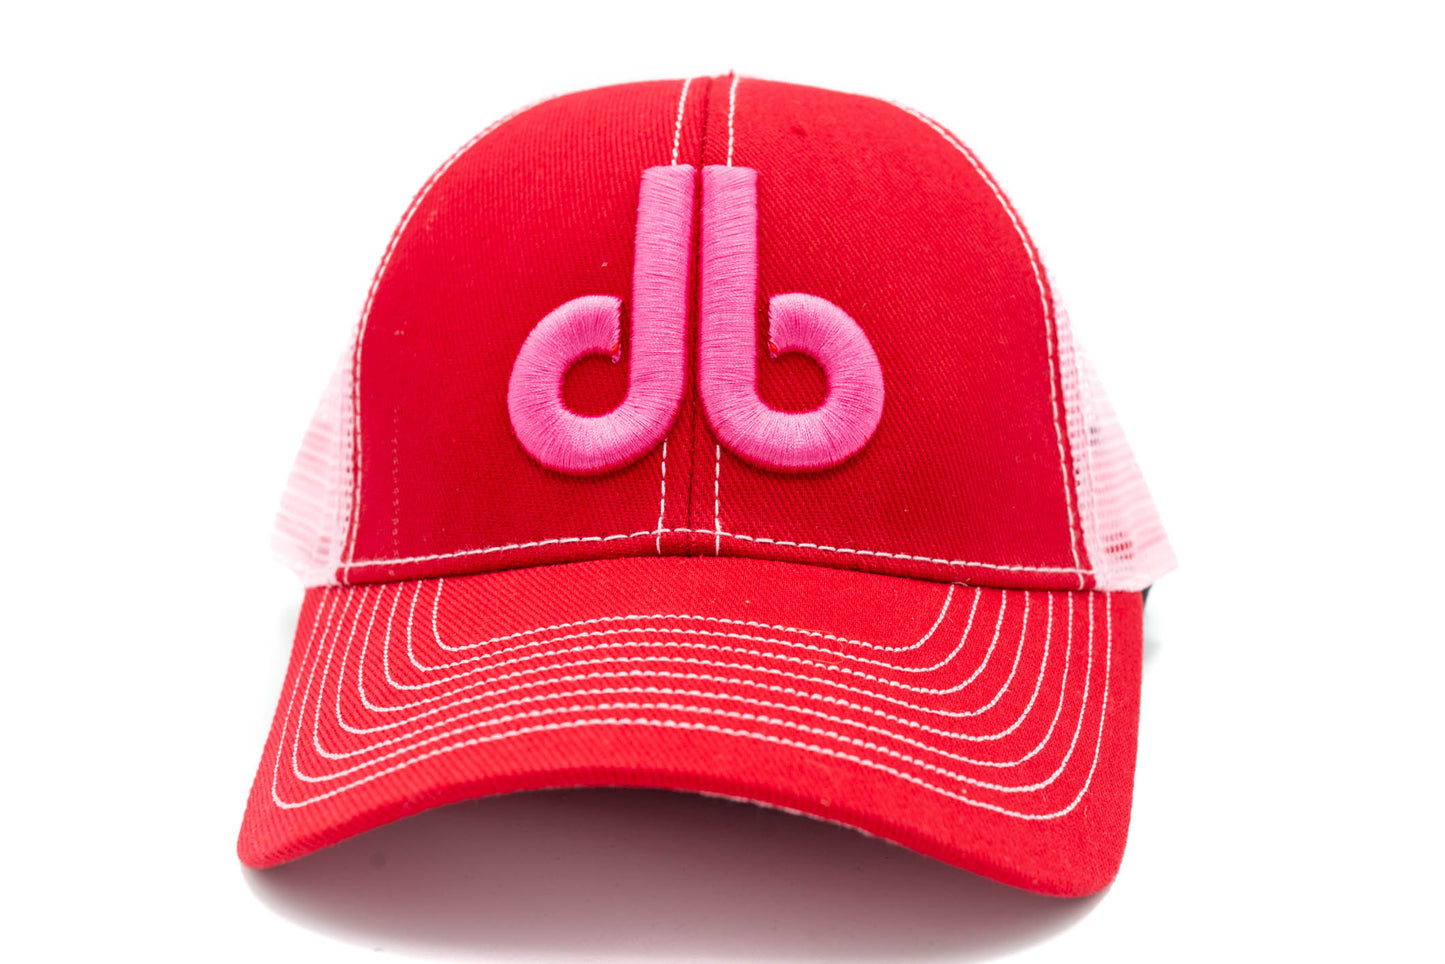 Ladies Cornhole Hat - Pink and Red Trucker